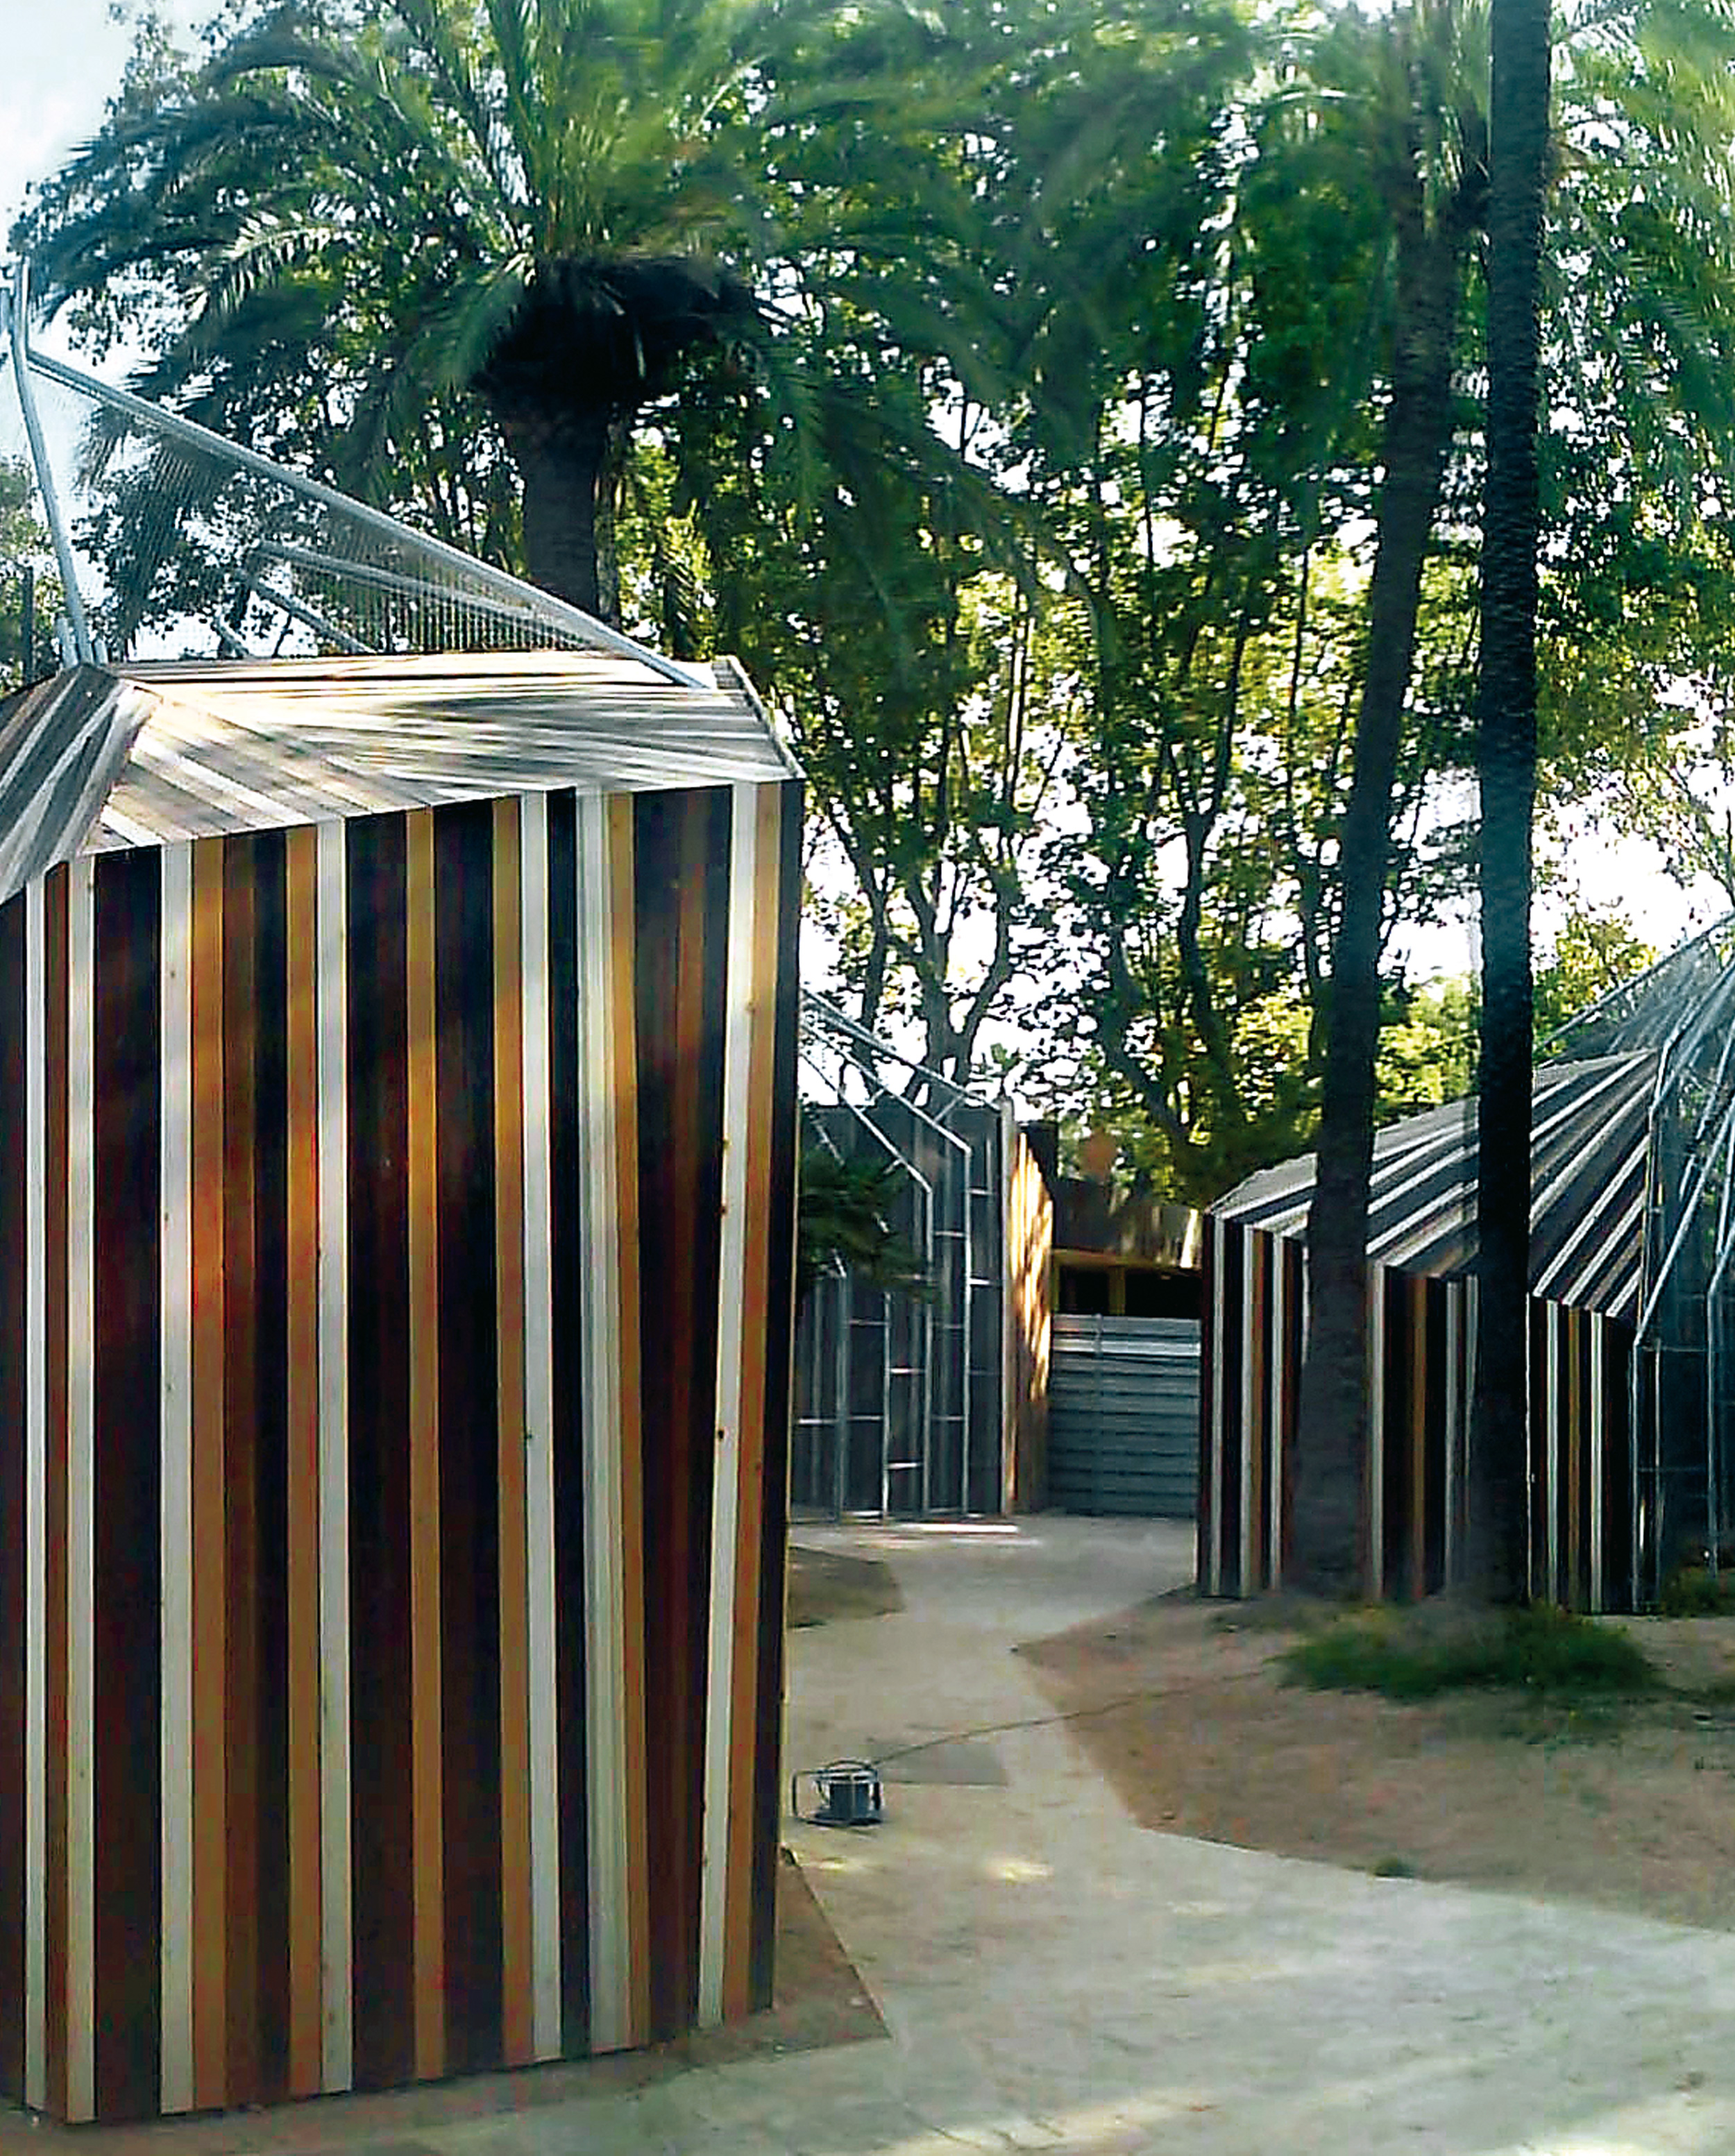 Cages for Macaws, Barcelona Zoo